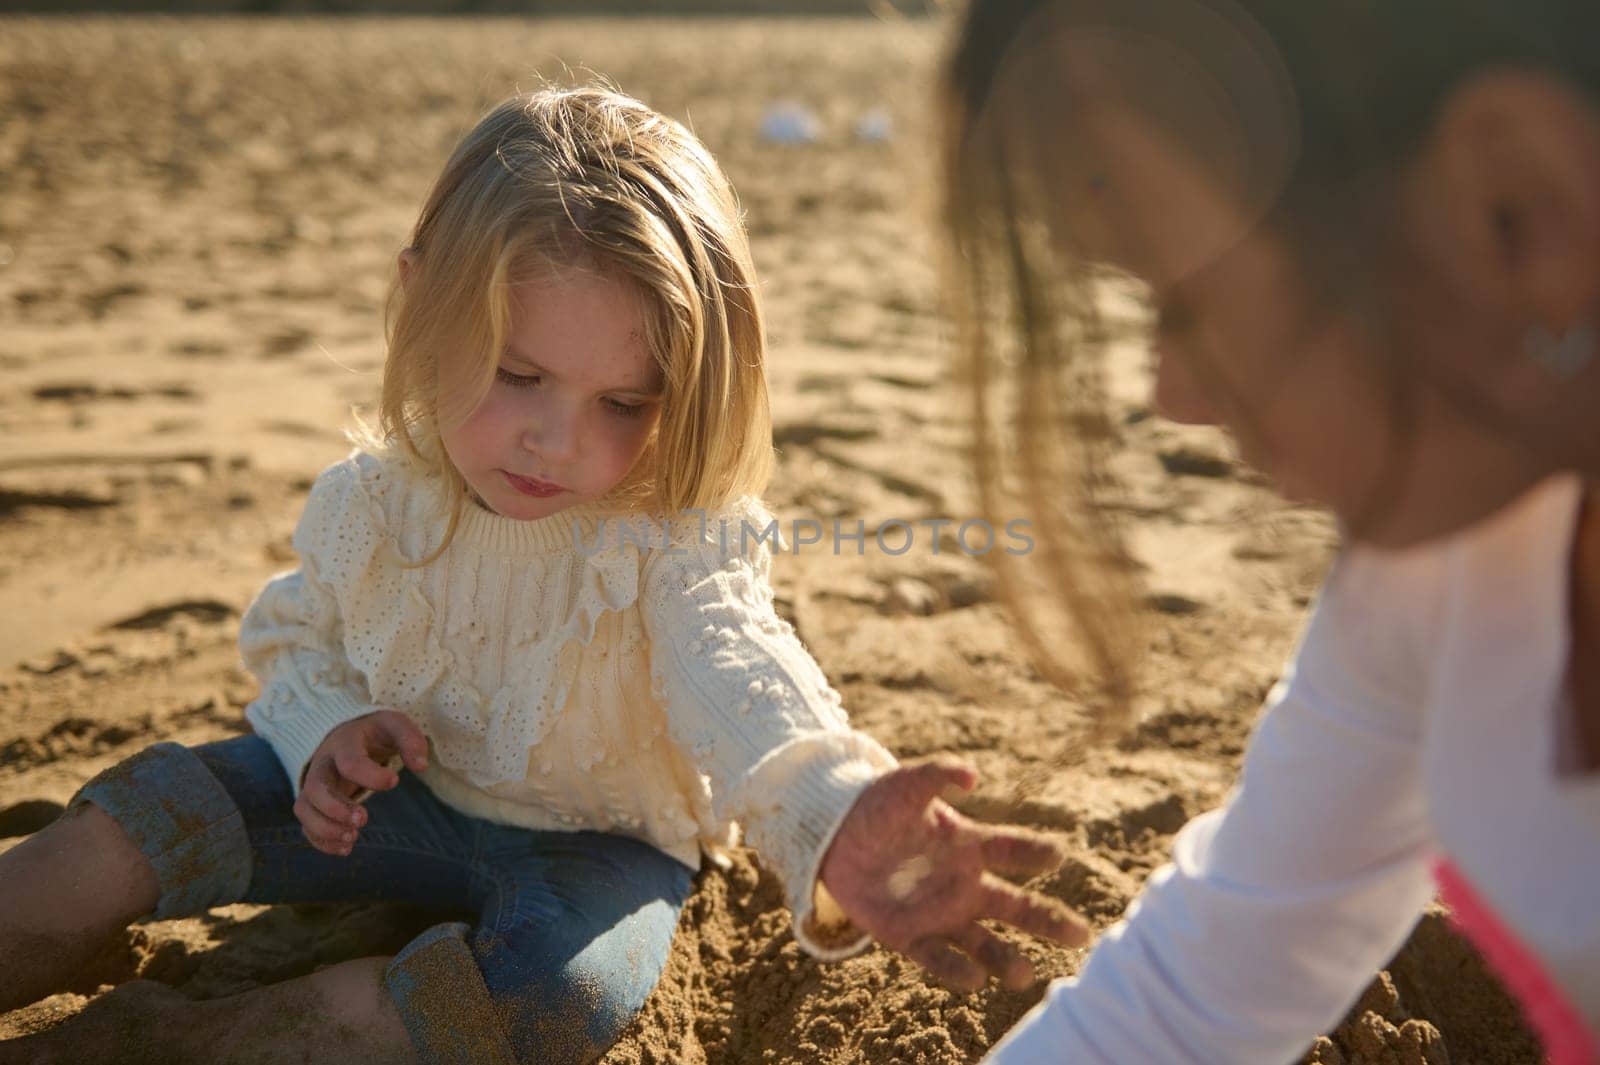 Close-up portrait of Caucasian beautiful little girls playing with sand on the beach. Two adorable children have fun together on the nature at sunset